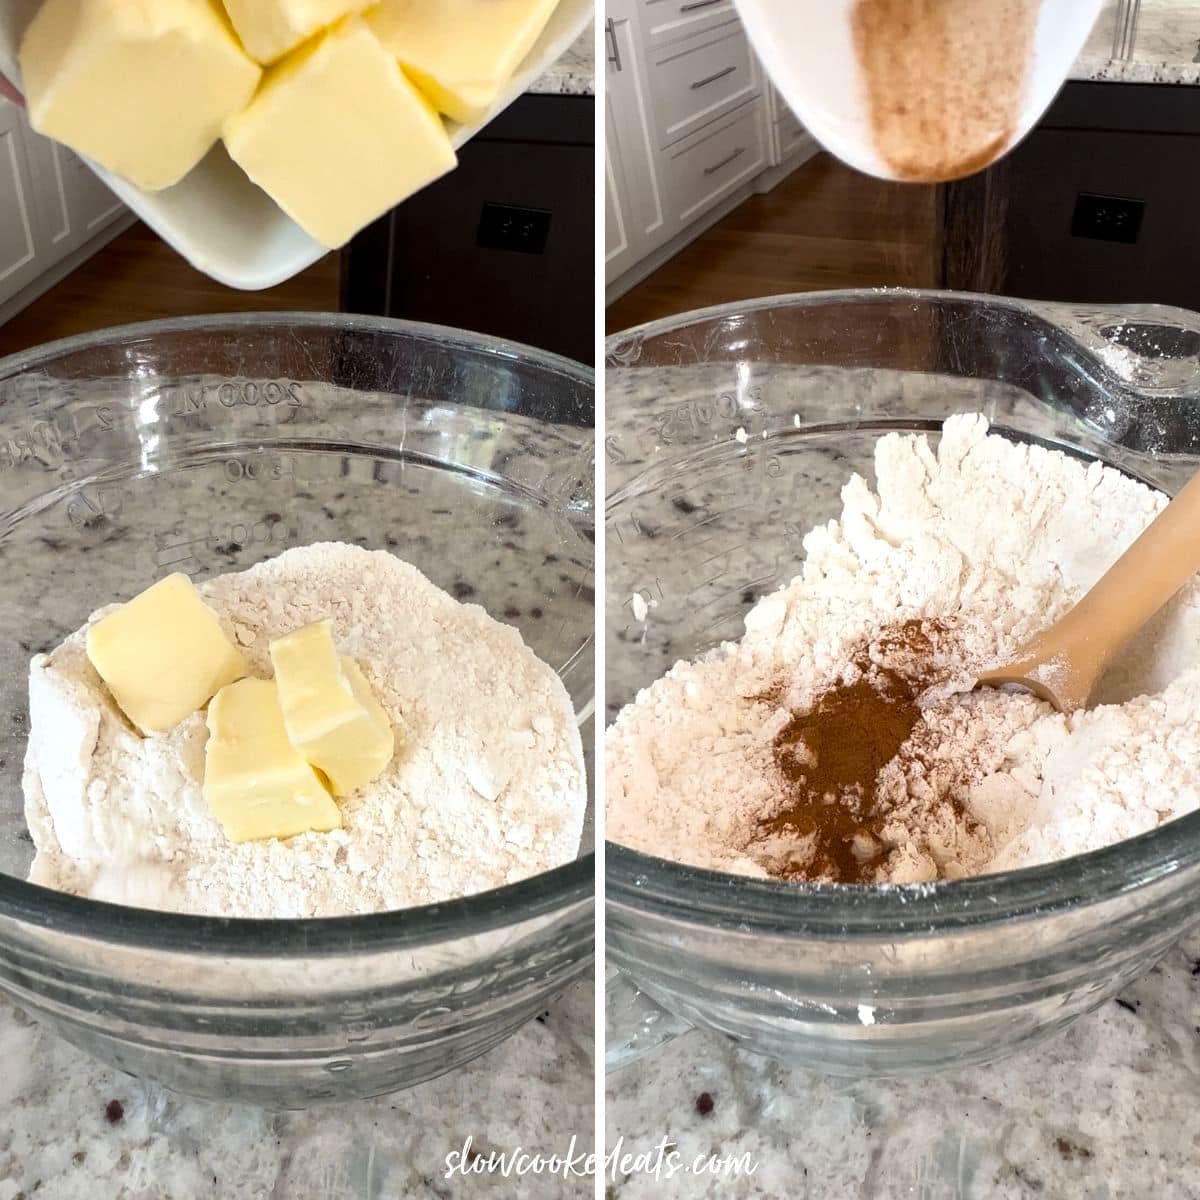 Adding butter, cake mix, and cinnamon to a small clear glass bowl.